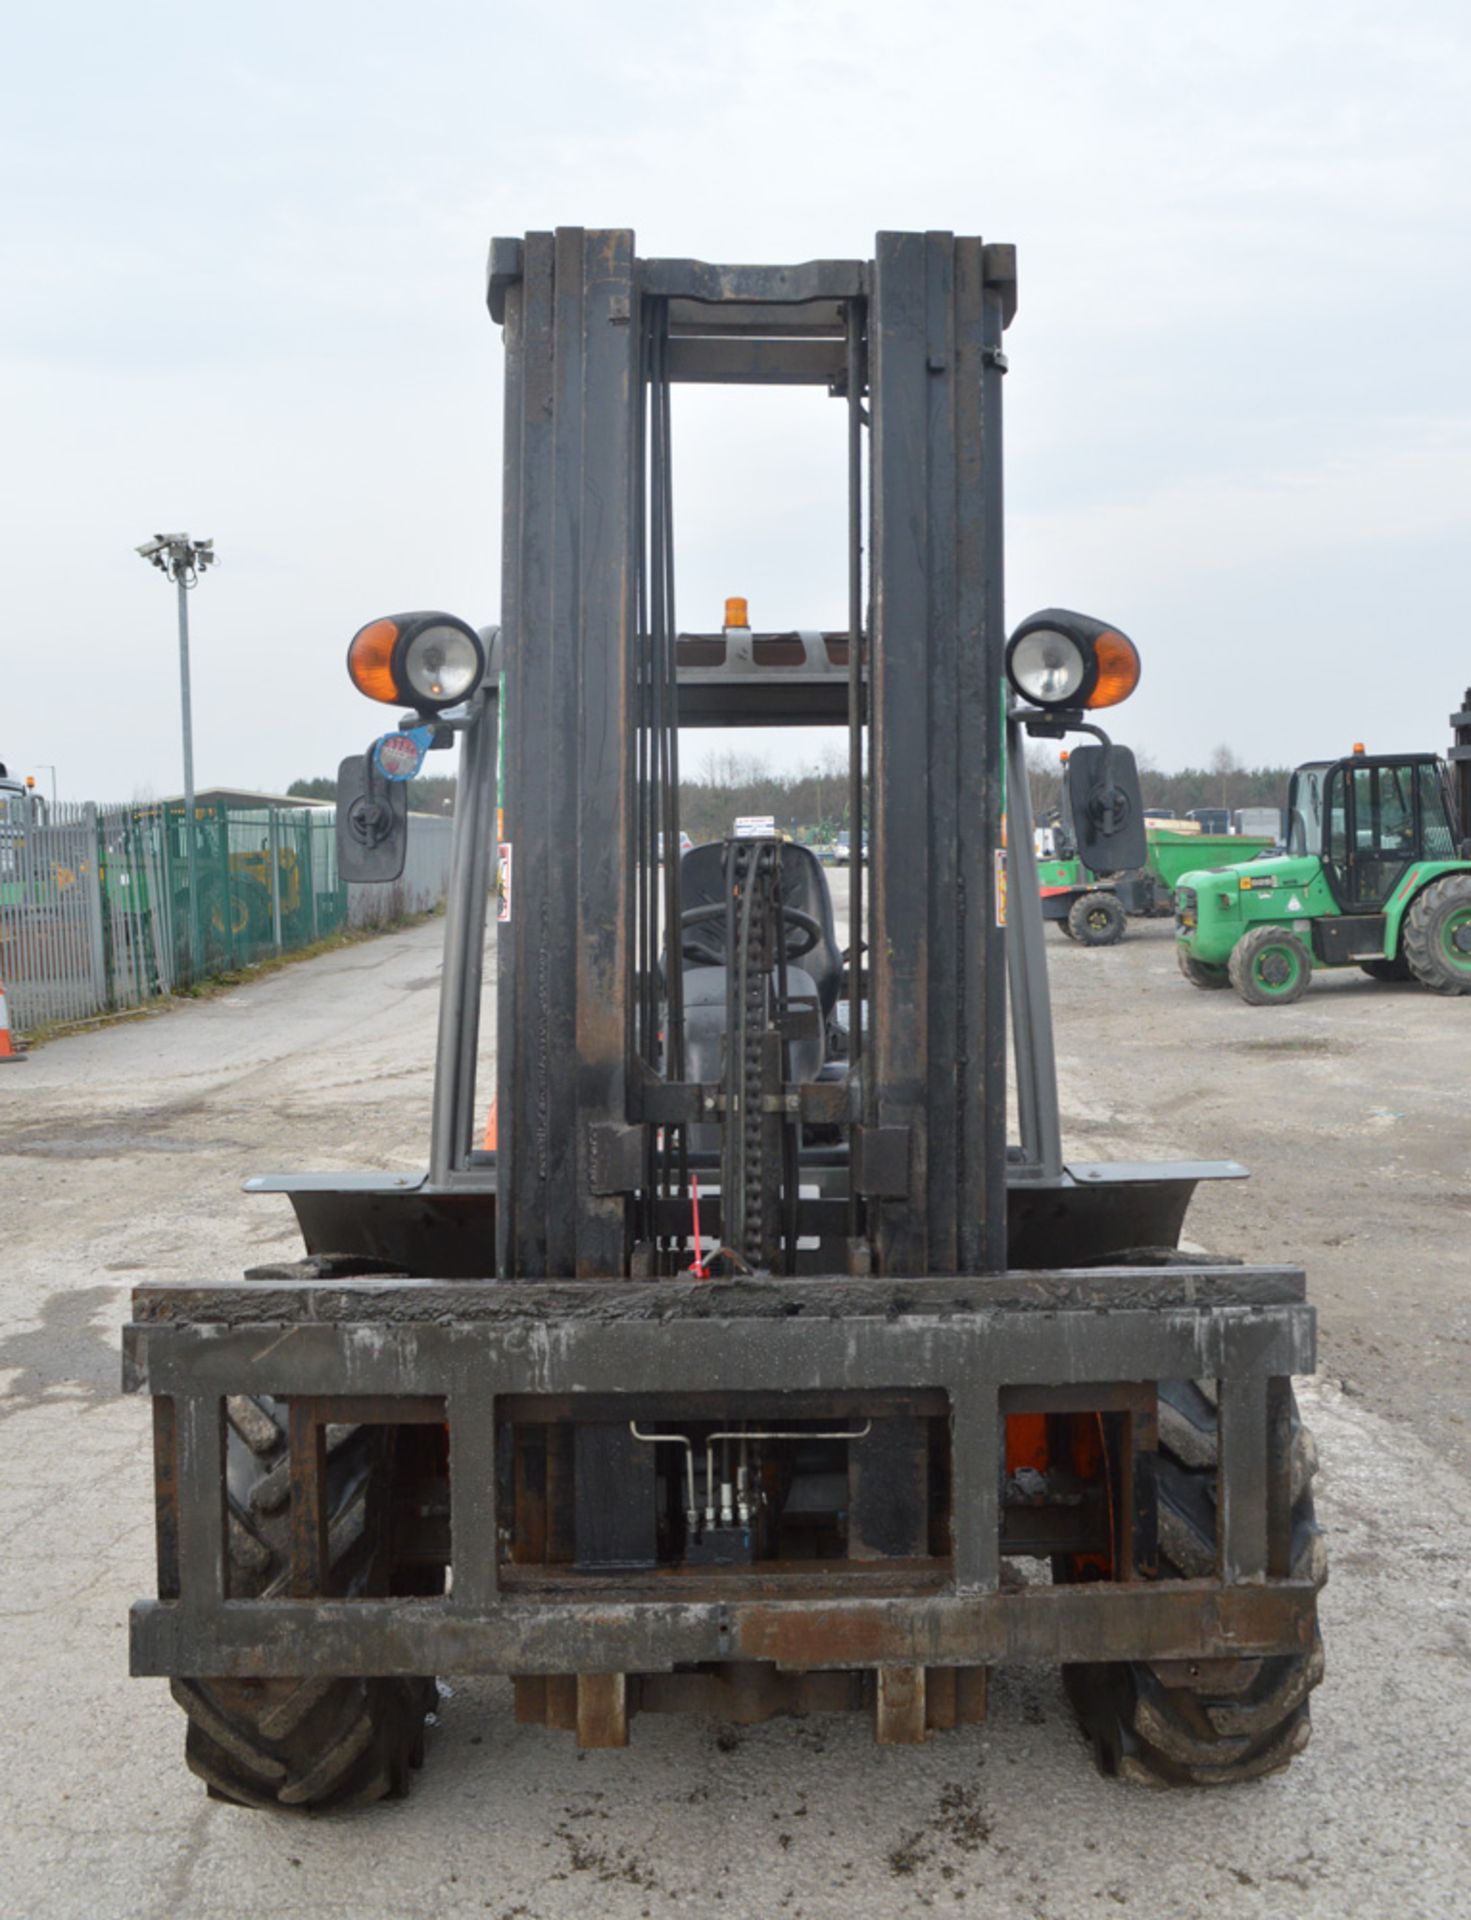 Ausa C300H 3 tonne diesel driven fork lift truck Year: 2007 S/N: 57055614 Recorded Hours: 2805 - Image 5 of 12